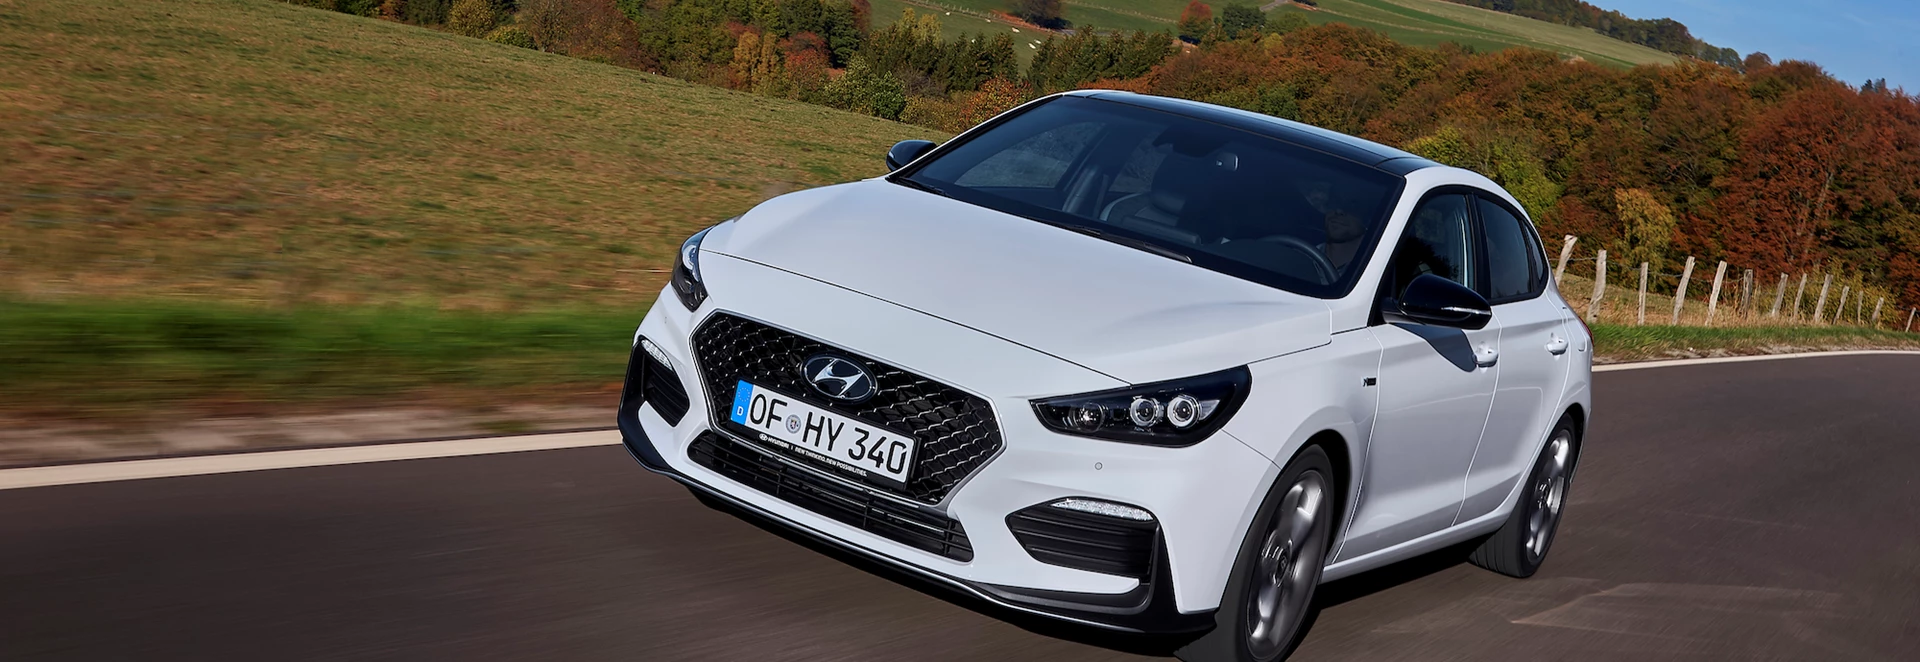 Prices and specs announced for 2019 Hyundai i30 Fastback N Line